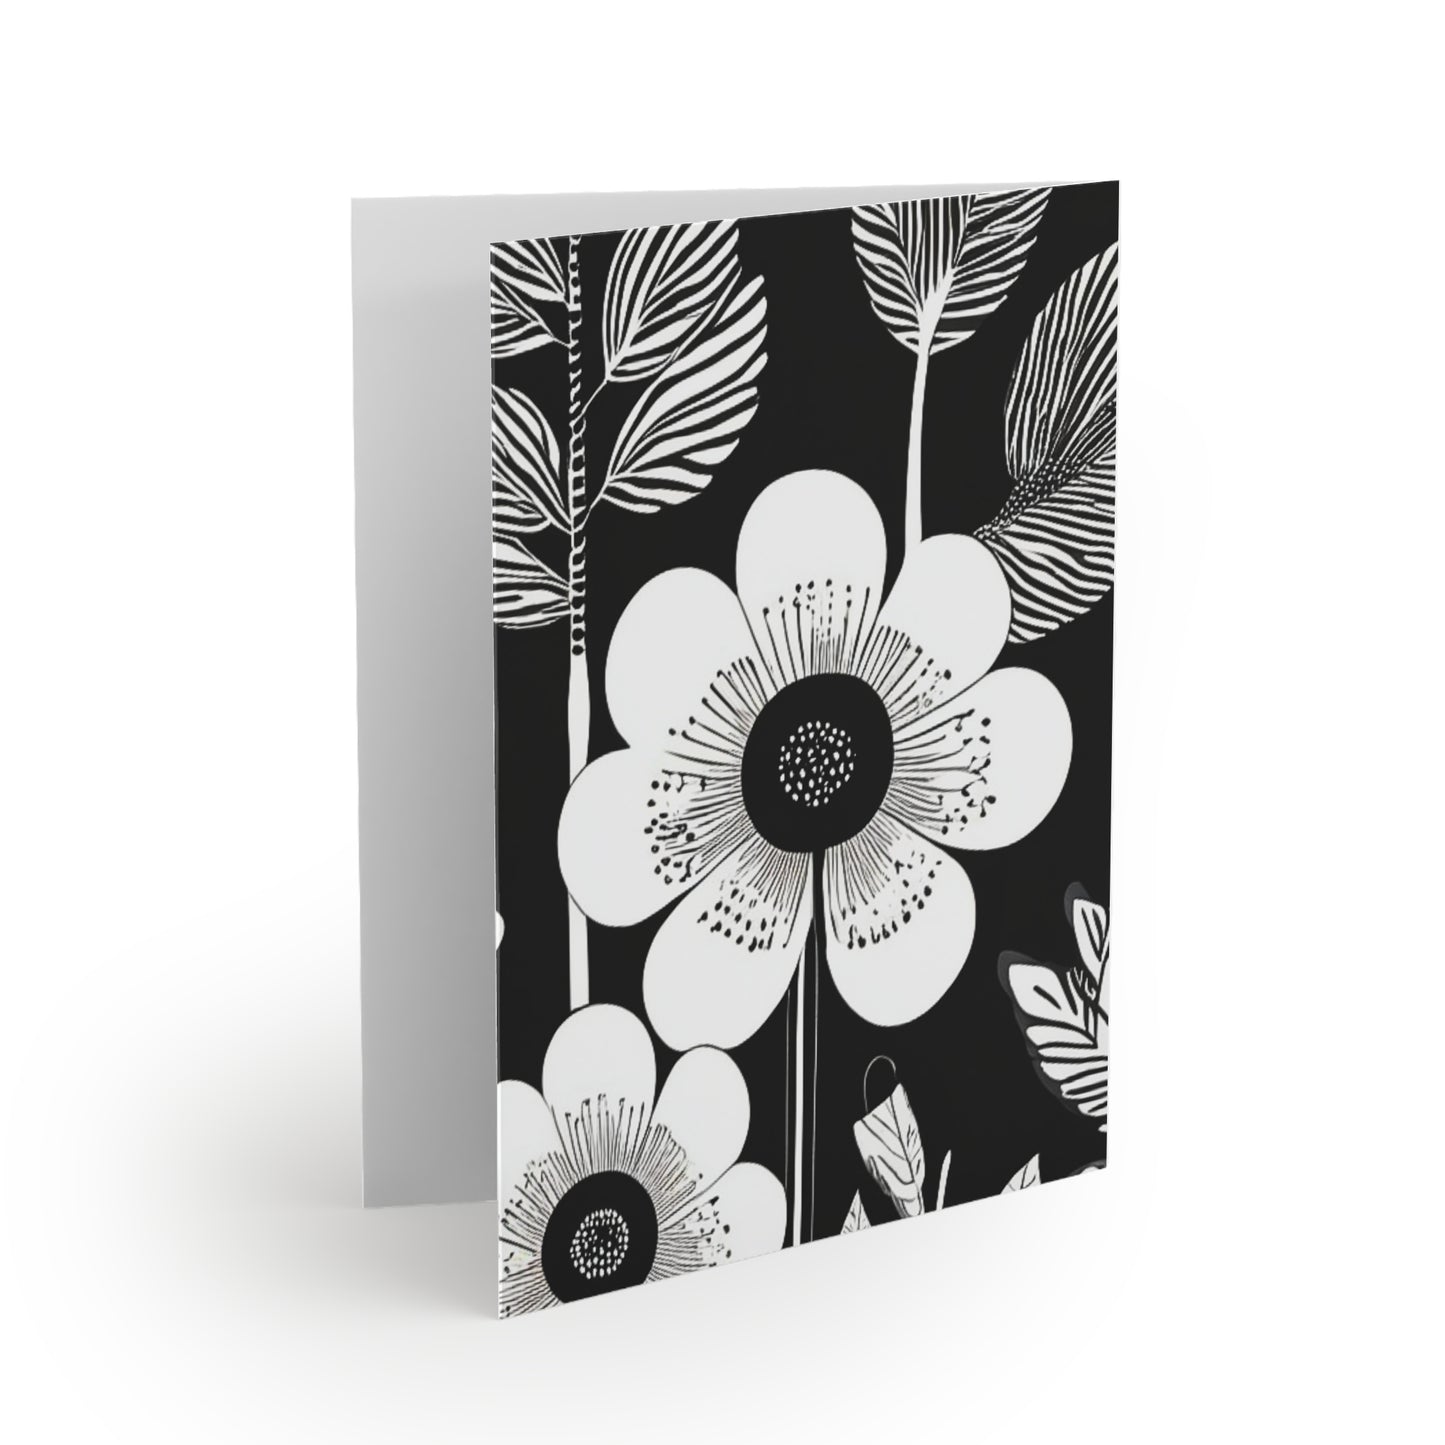 Black and White Poppies Mod 1960s Pop Art Decorative Note Greeting Cards (8 pcs)